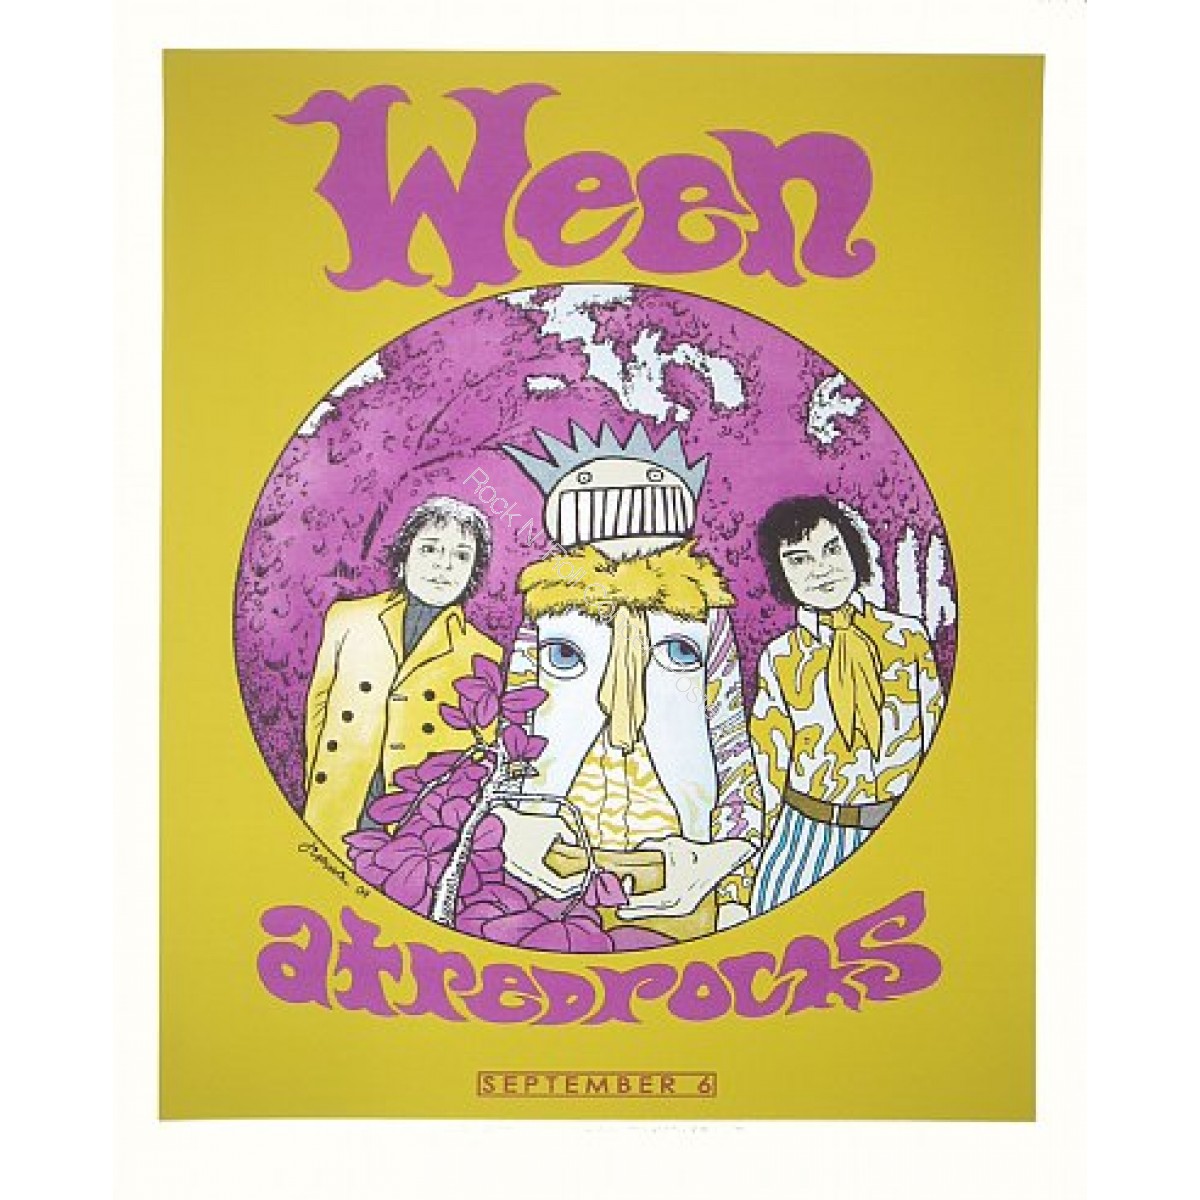 Ween @ Red Rocks Amphitheatre Original 1st edition print by Jermaine Rogers 9/6/09